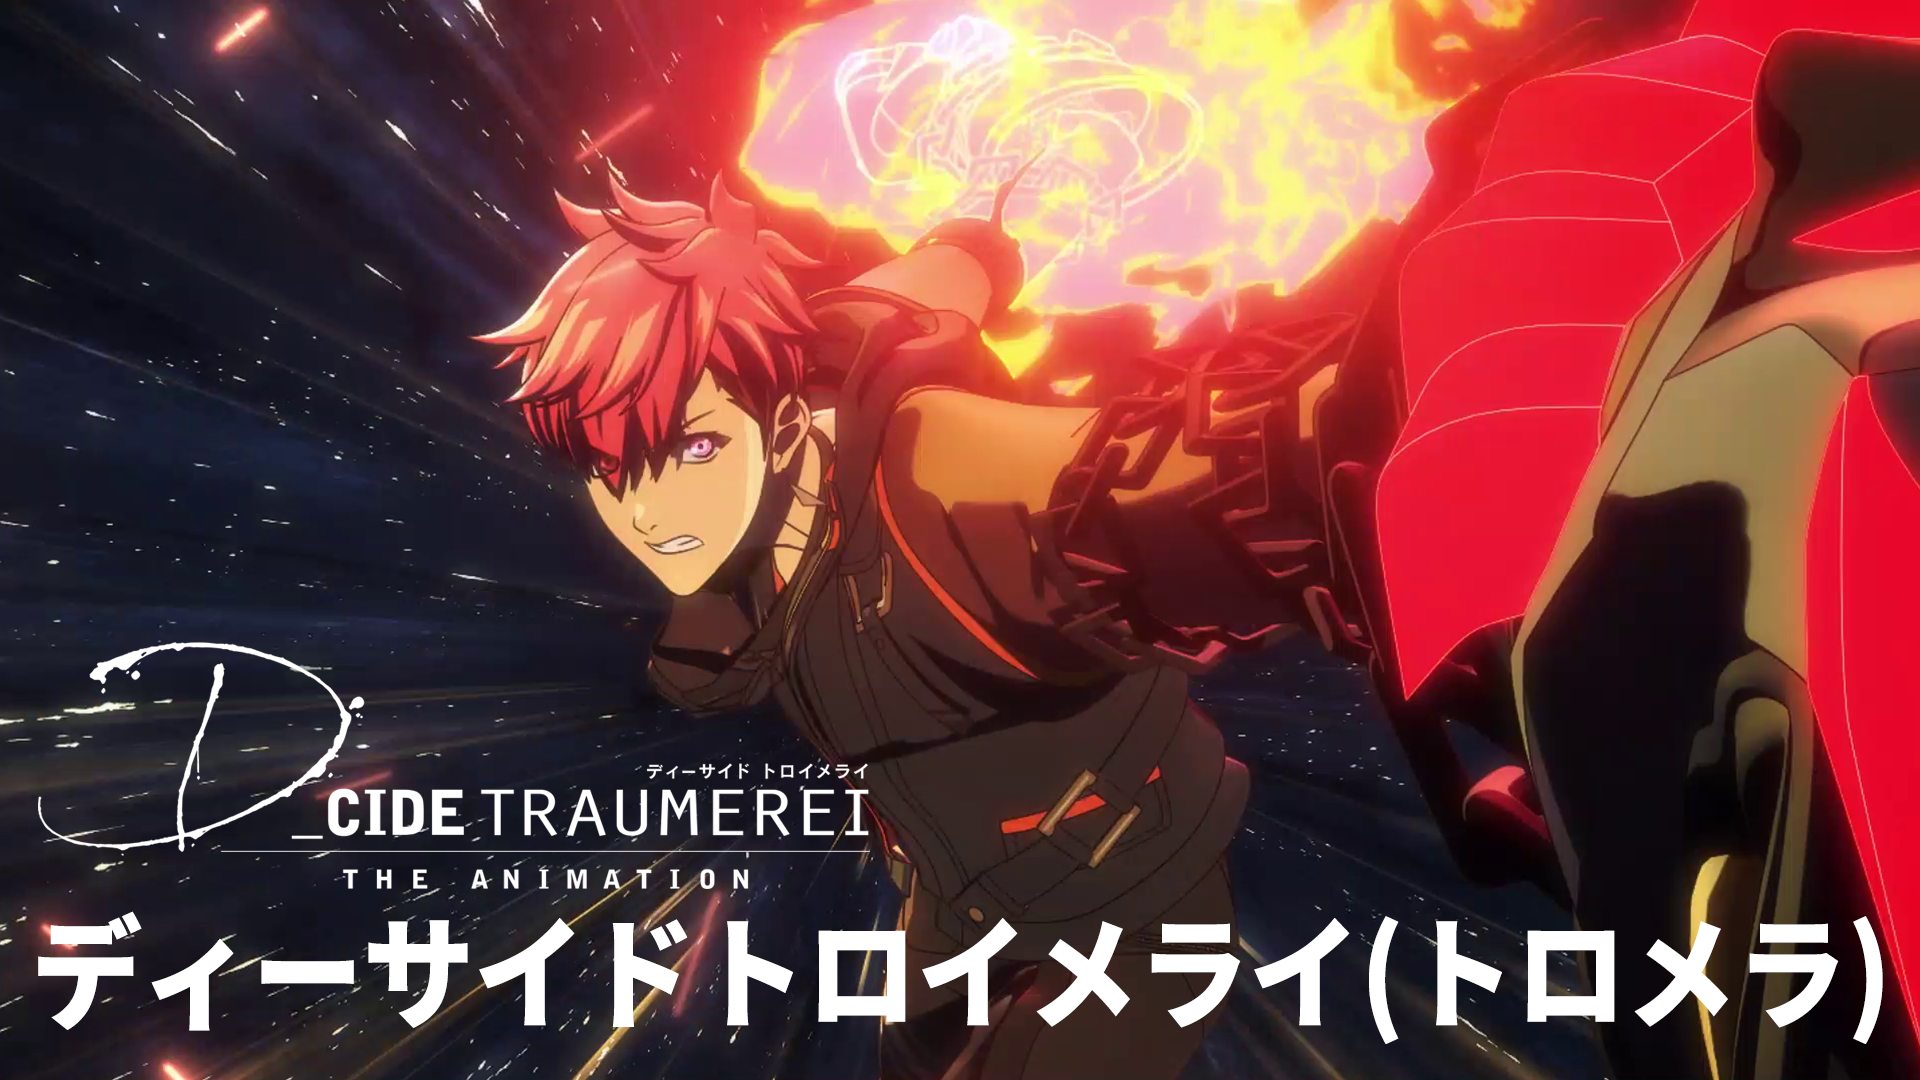 D_CIDE TRAUMEREI THE ANIMATION 動画